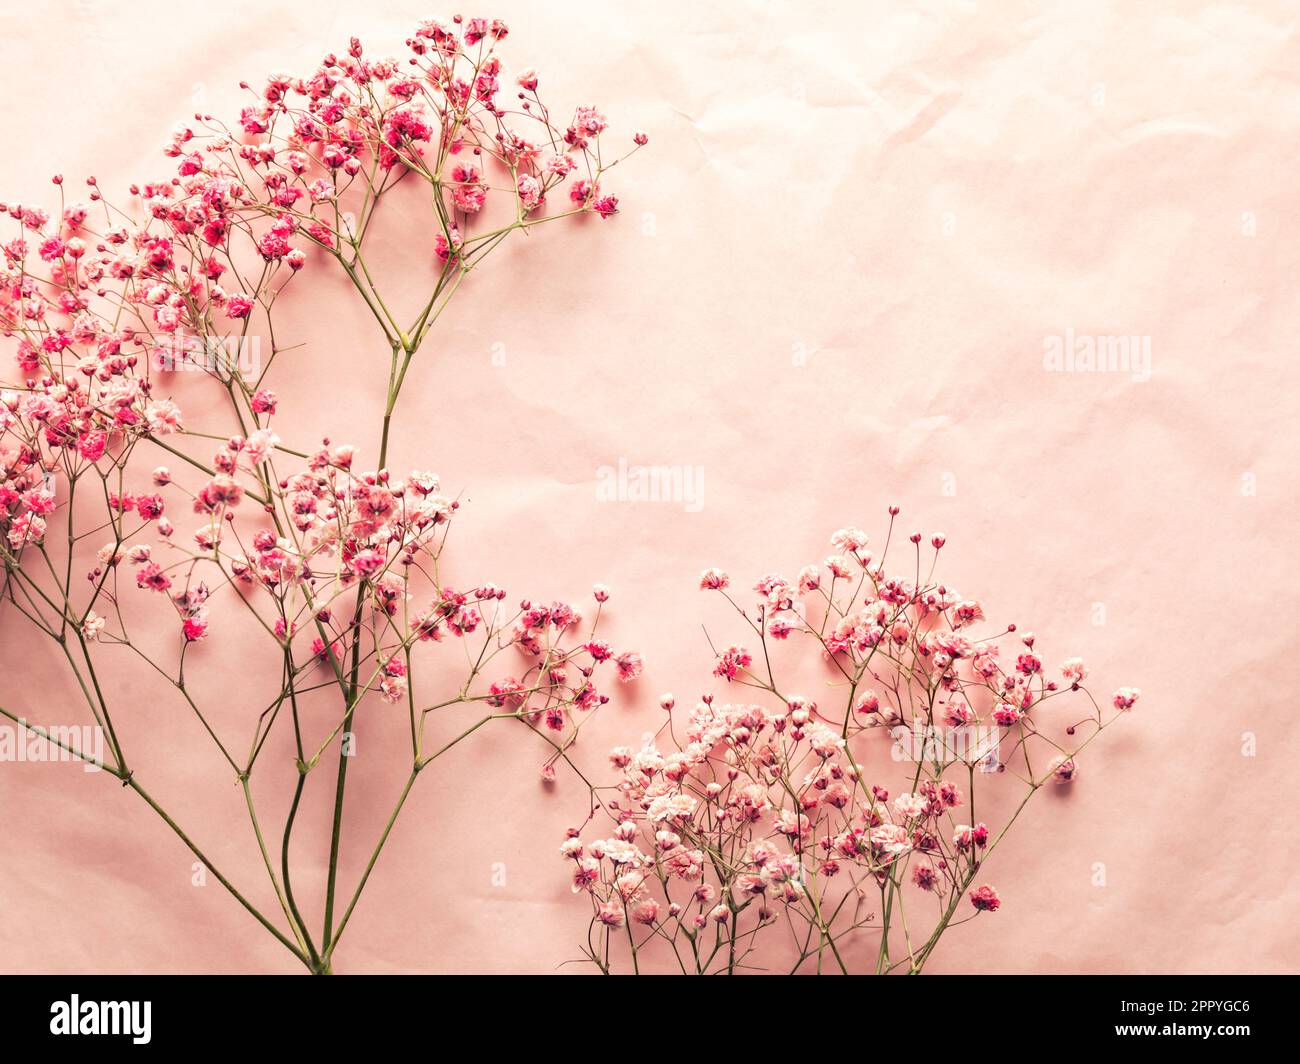 Floral background for graphic design. Mockup Stock Photo